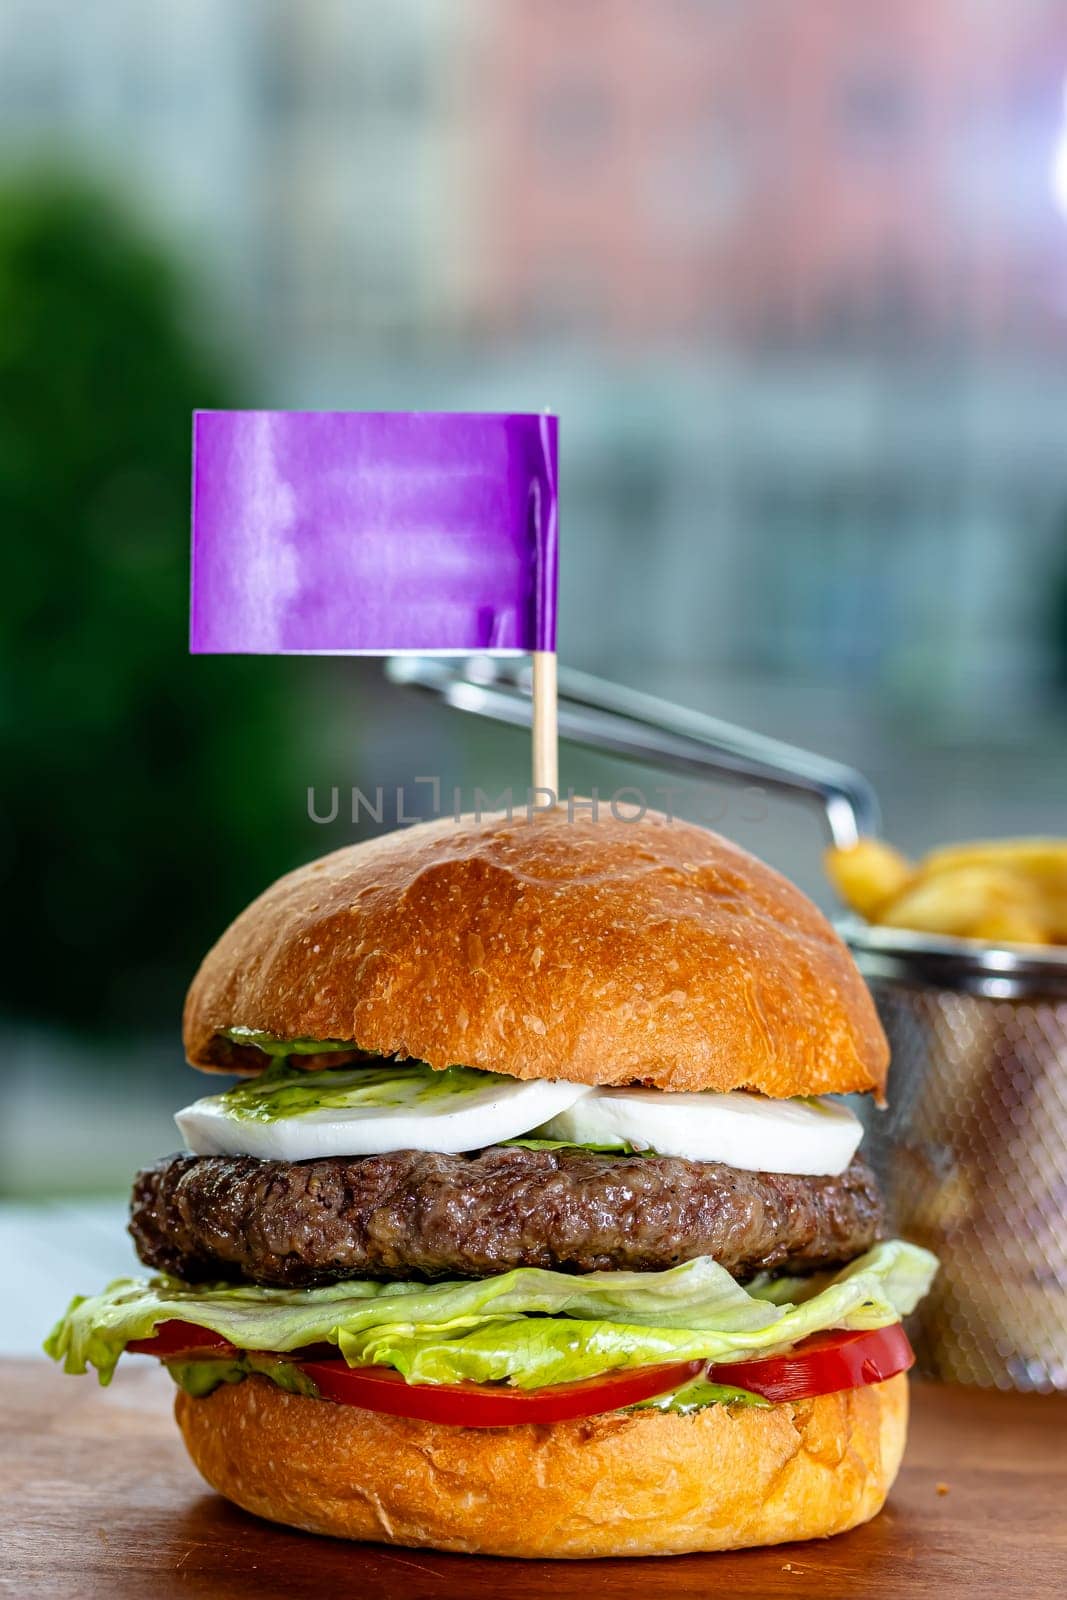 Lamb burger. Hamburger made with lamb meat. Classic traditional Greek variation of the classic American burger tradition. seasoned lamb meat with feta cheese, red onion, cucumbers and Greek mayo by Milanchikov